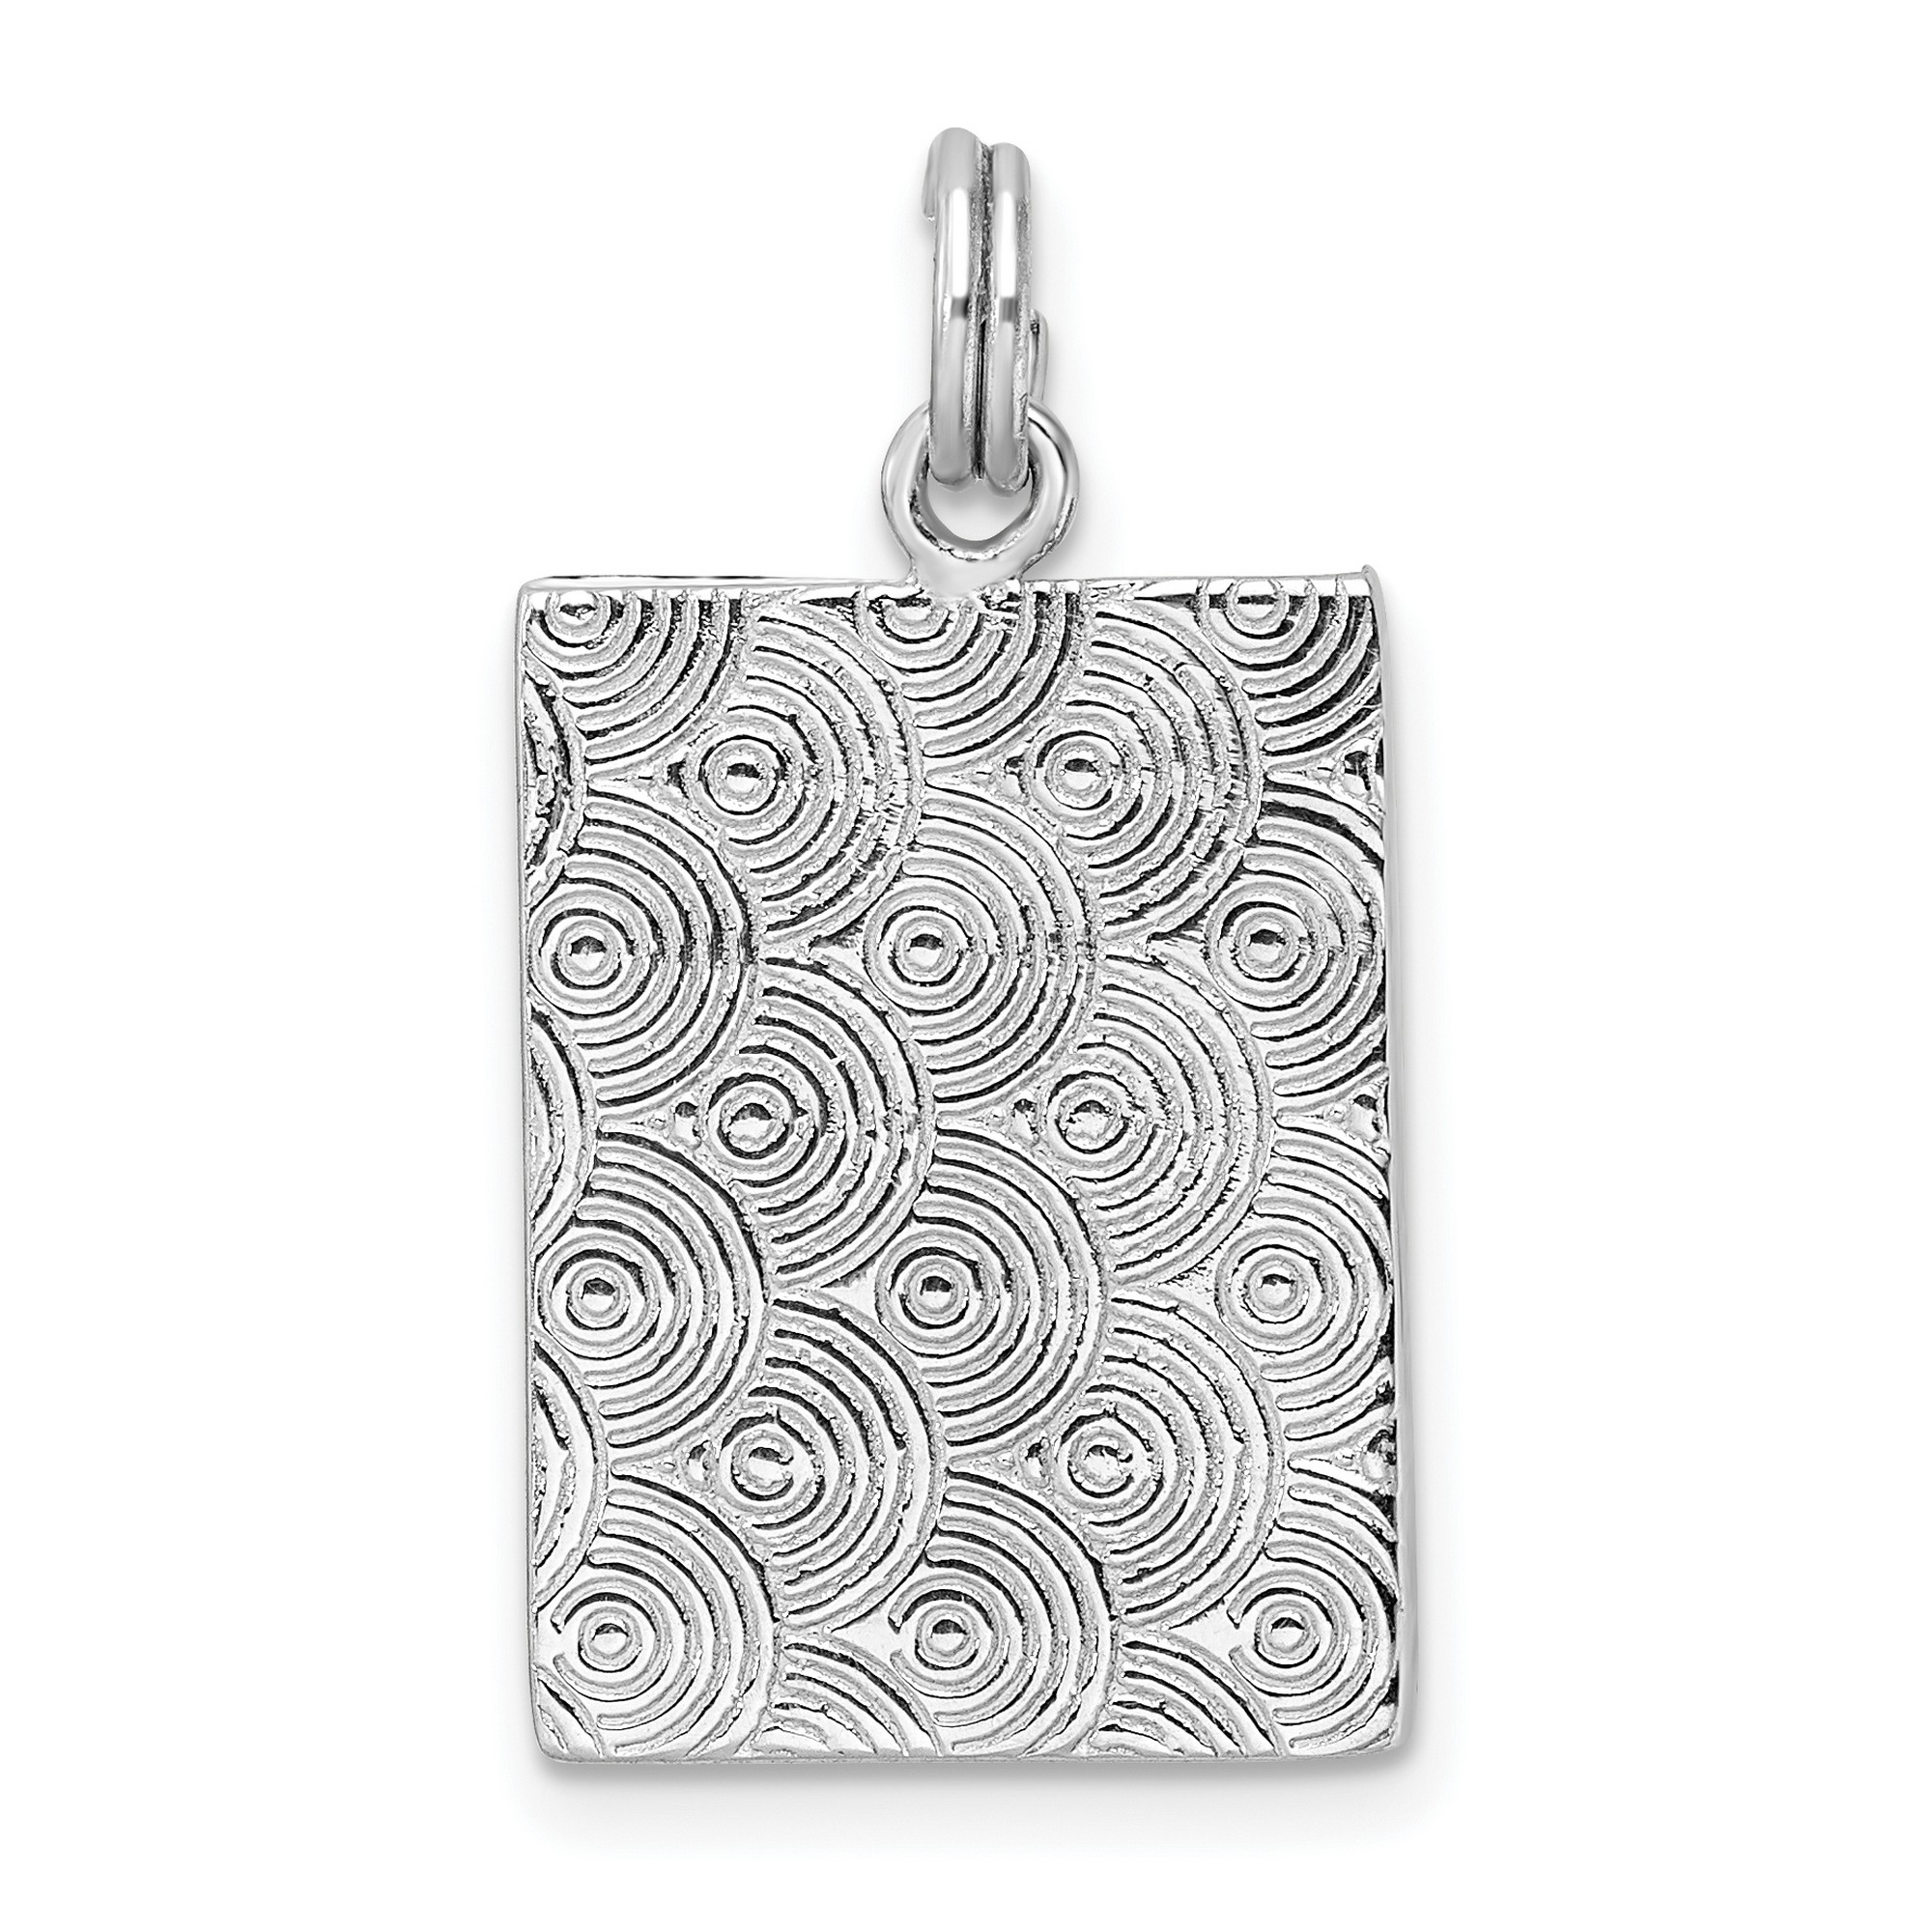 Picture Frame Charm Pendant With Patterned Edges in 925 Sterling Silver eBay